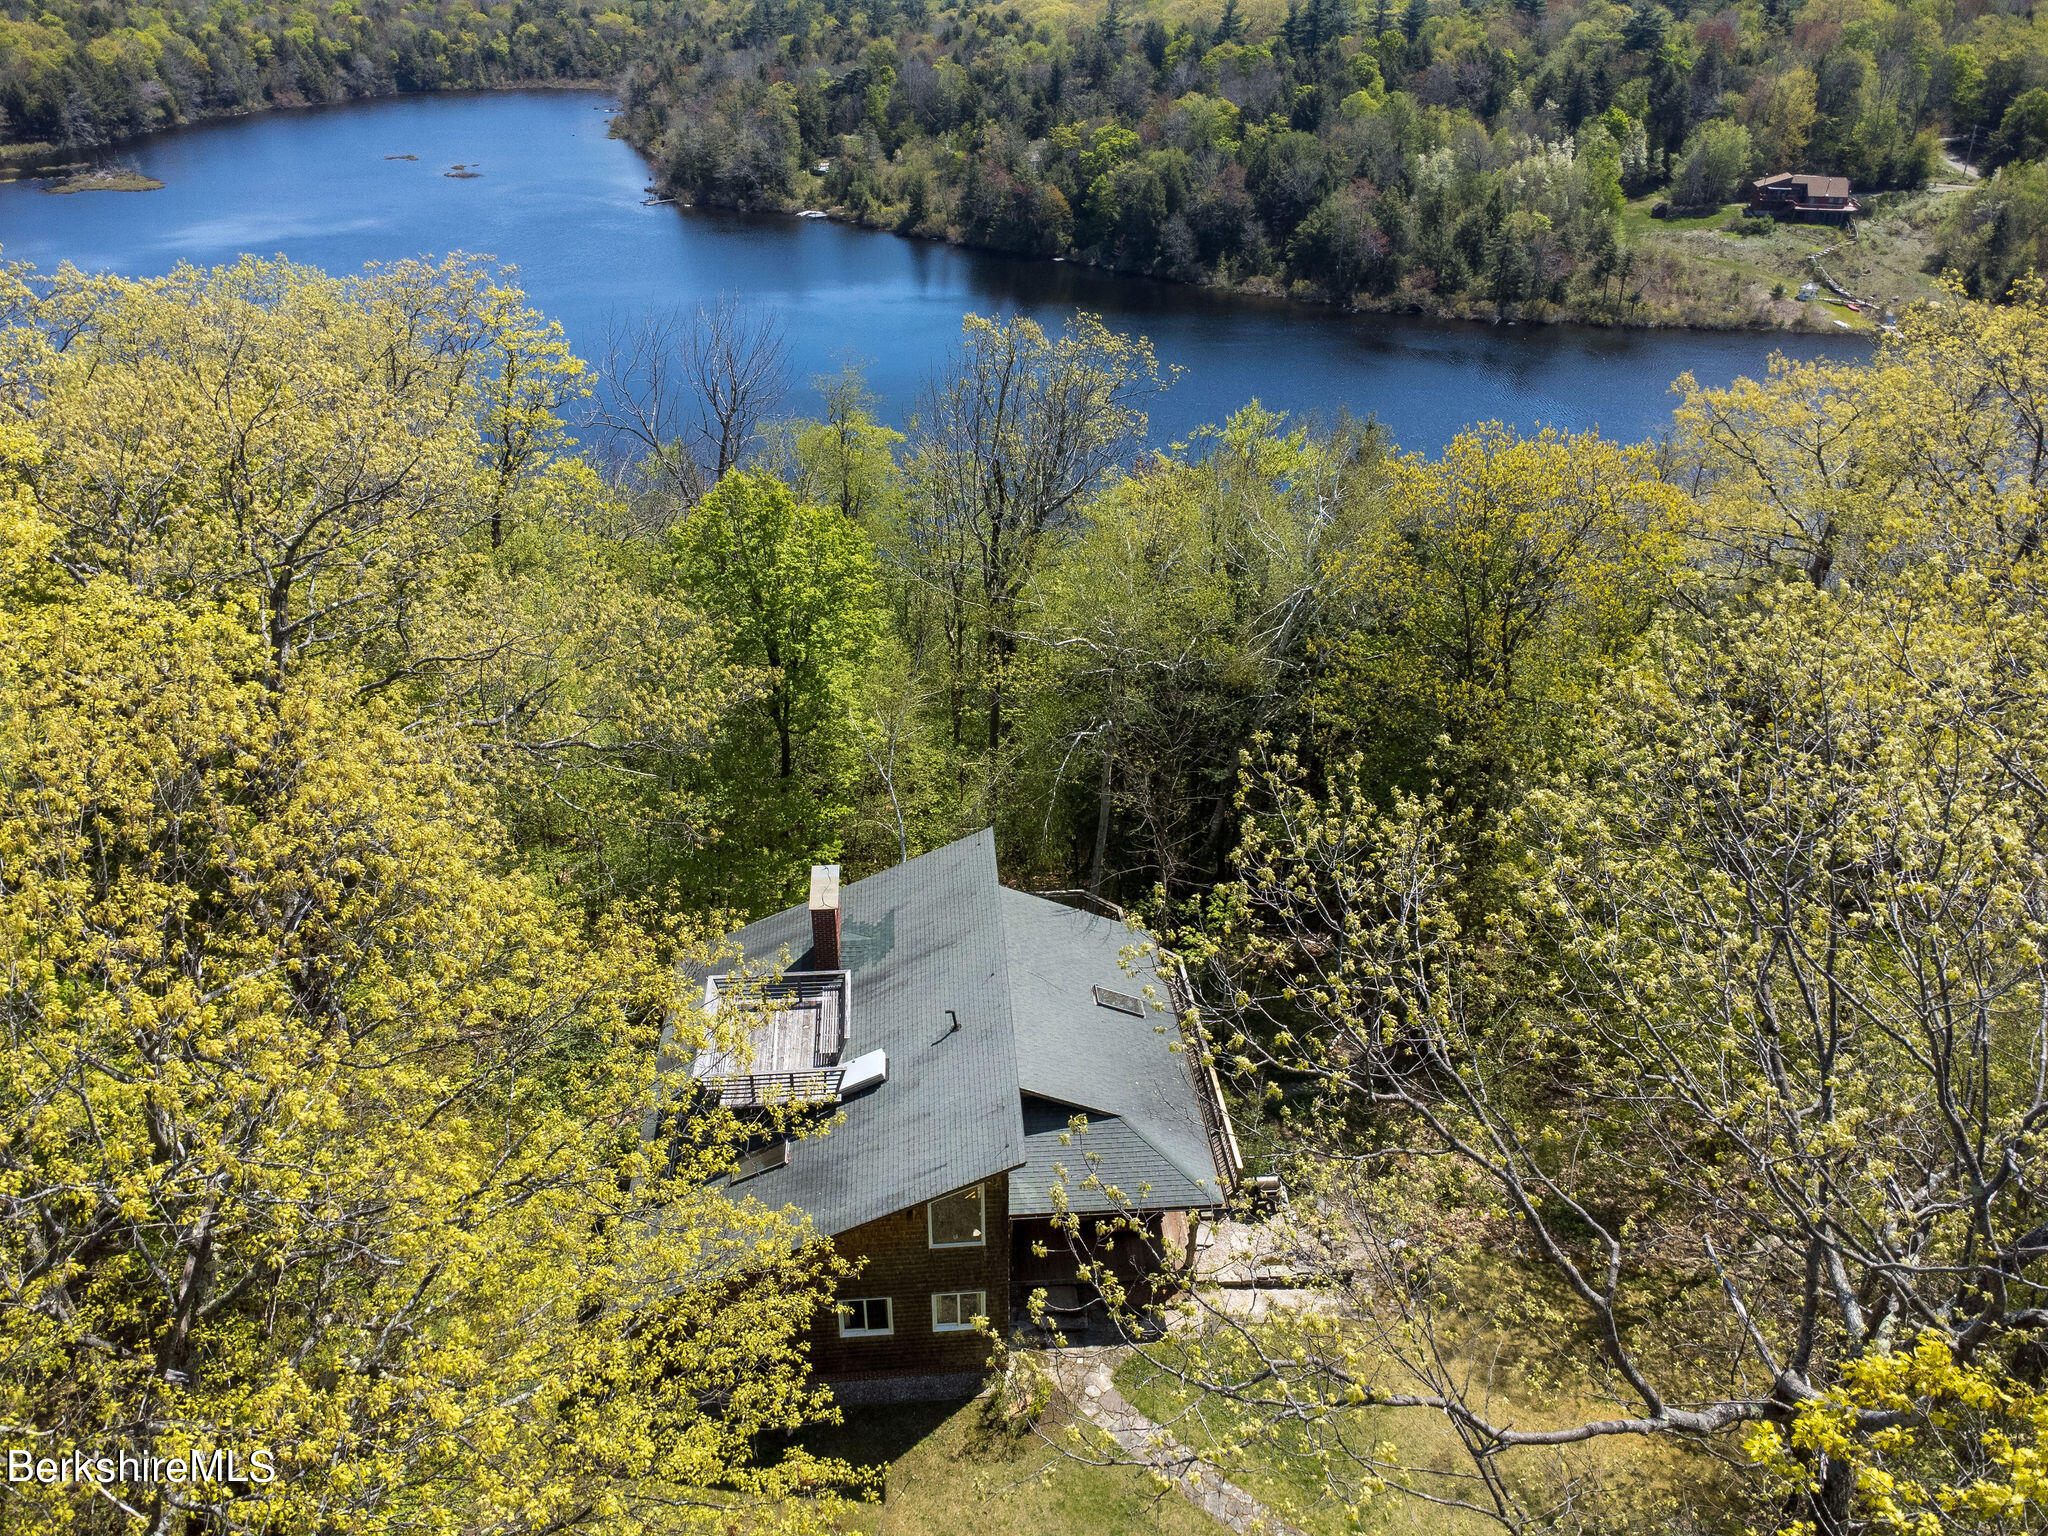 an aerial view of a house with a yard lake and trees all around